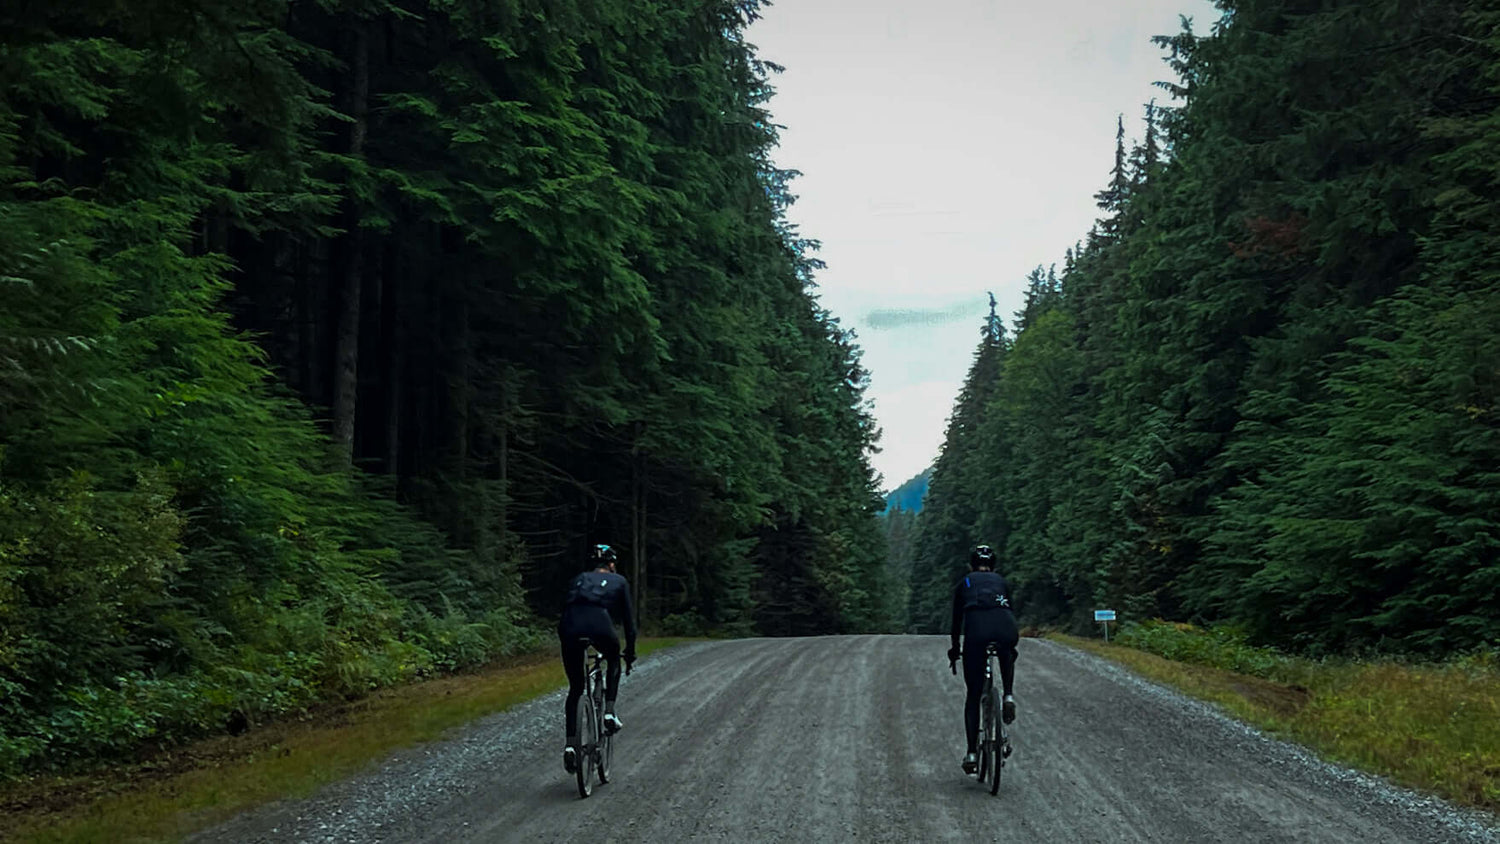 MAAP Men's Cycling Apparel - Exploring the Pacific Northwest riding in MAAP's bib tights and jackets.